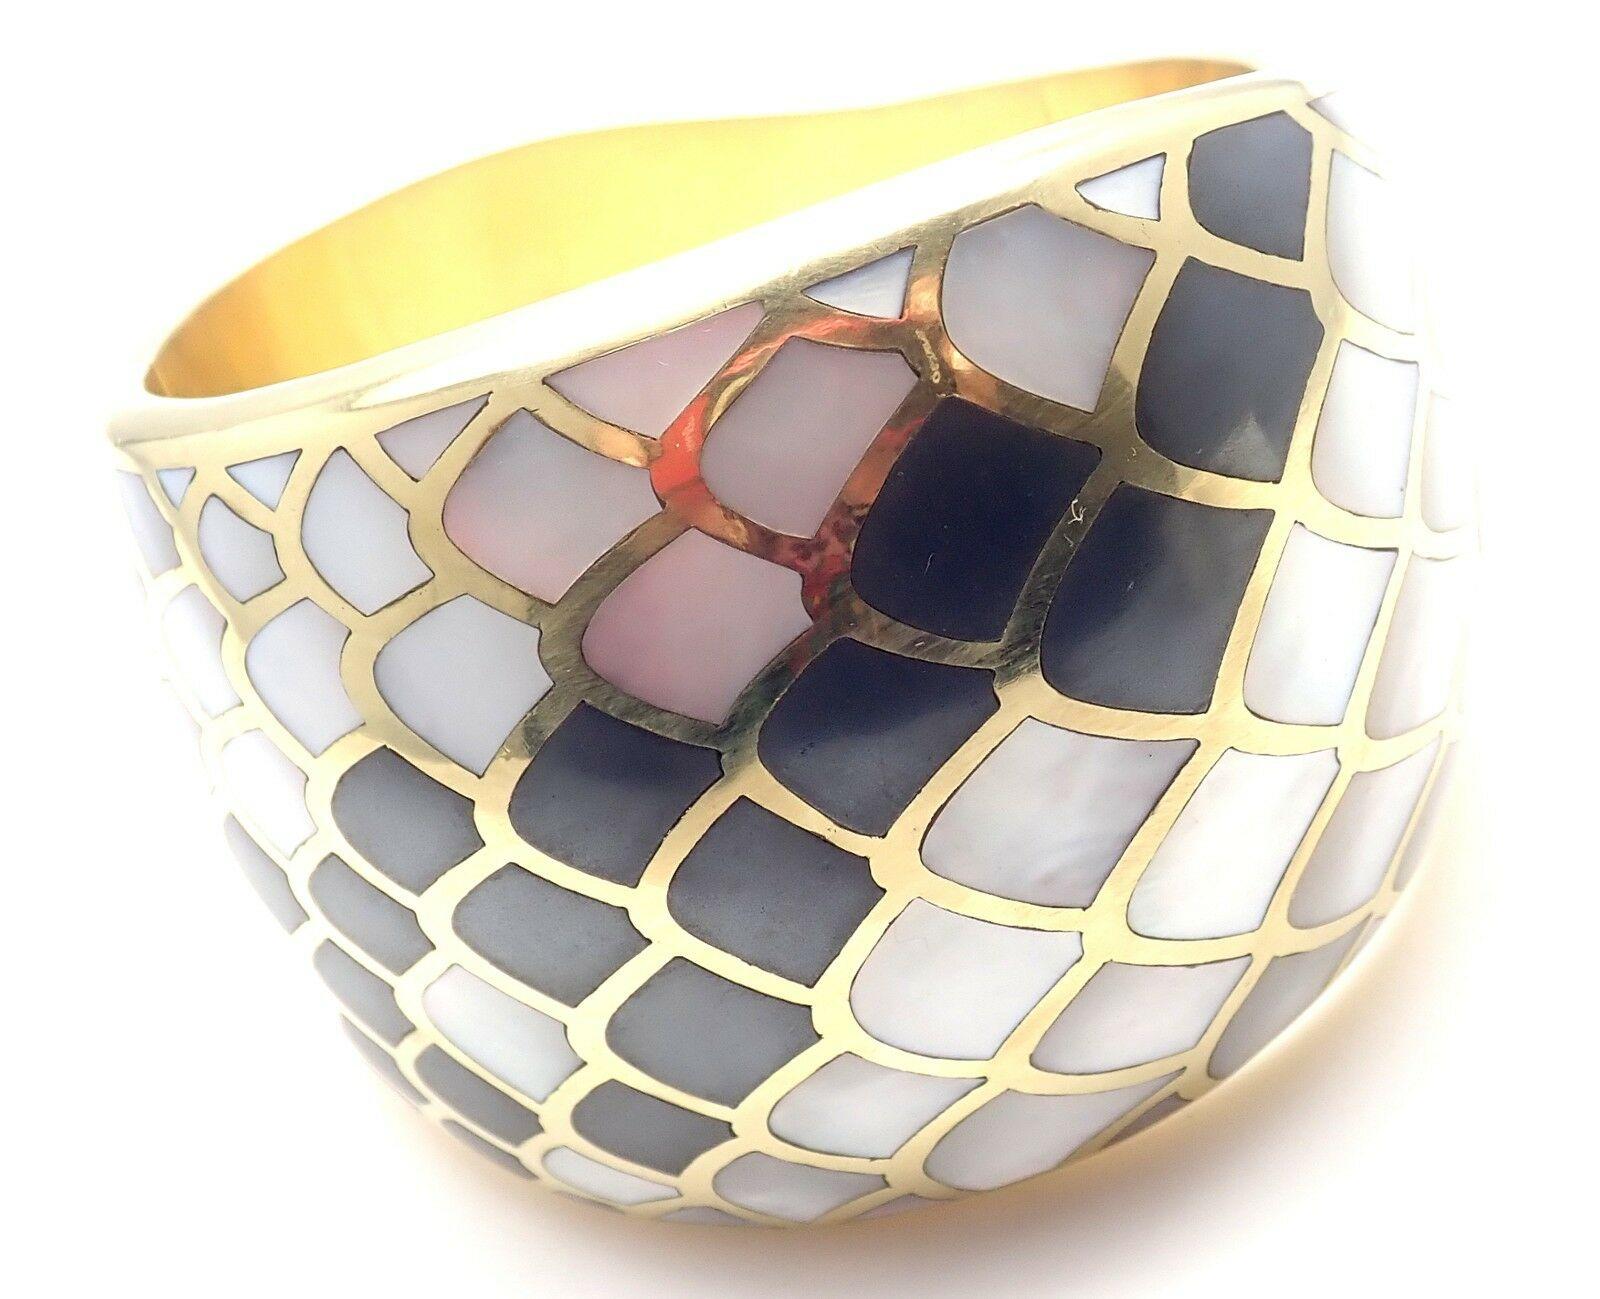 18k Yellow Gold Inlaid Mother Of Pearl Snakeskin Wide Bangle Bracelet by Angela Cummings. 
Circa 1984.
With inlaid mother of pearl to resemble snakeskin.
Details: 
Weight: 121.2 grams
Length: 7